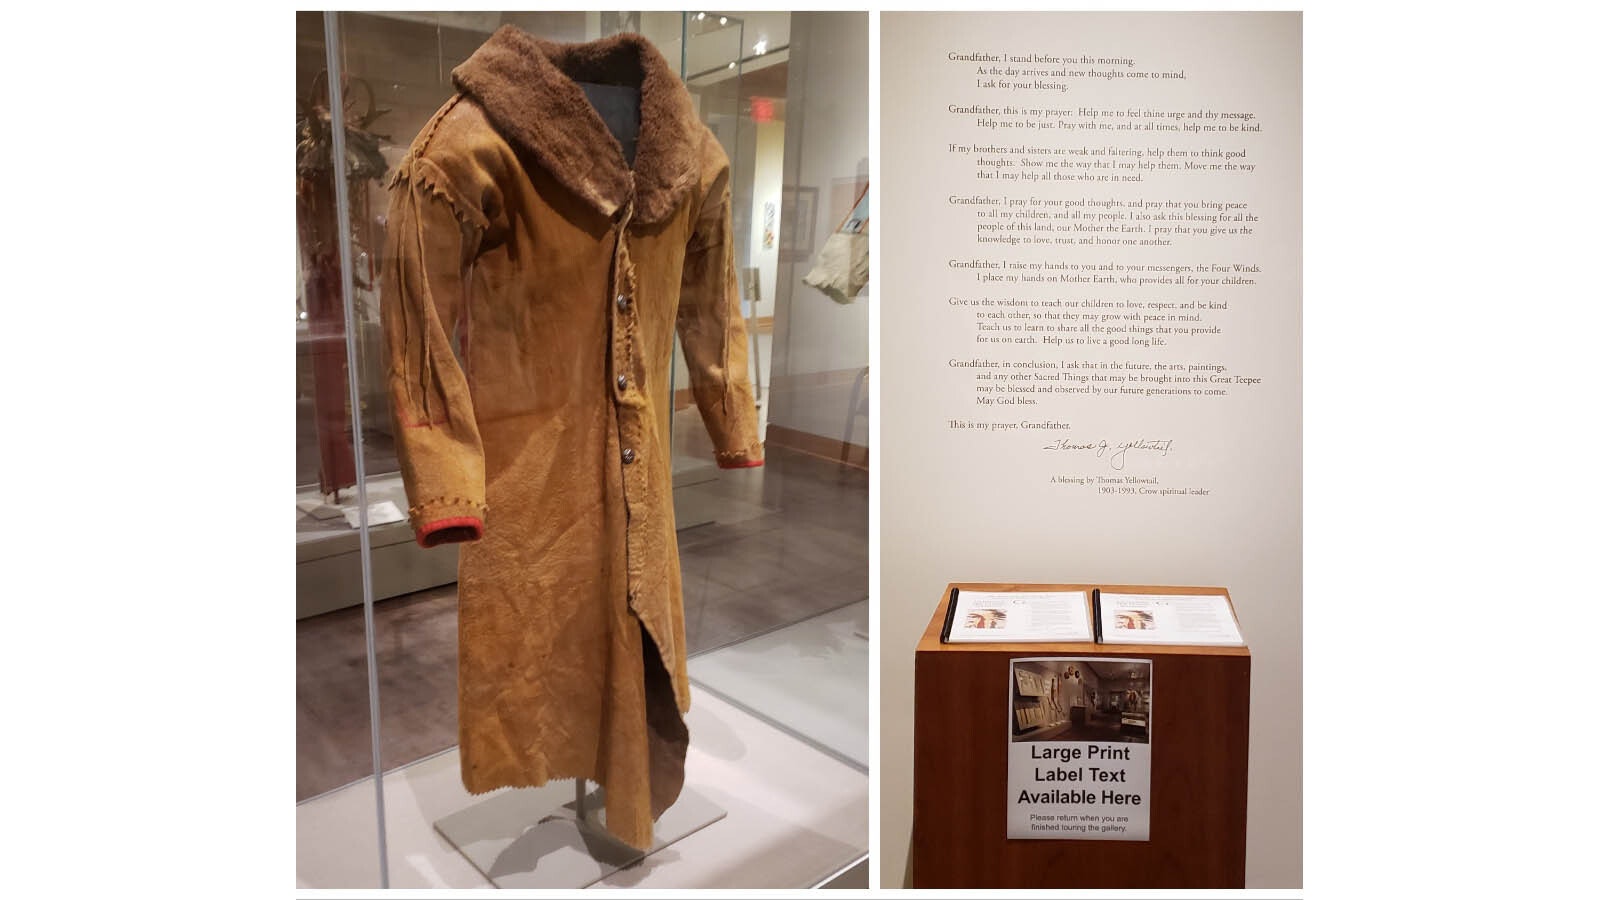 A horse track painted in sacred red on the right sleeve of this coat suggests it was used by a horse doctor. Behind the coat is a pouch for herbs to bless or heal, and an eagle feather. At right, a prayer to honor the Plains Indians.